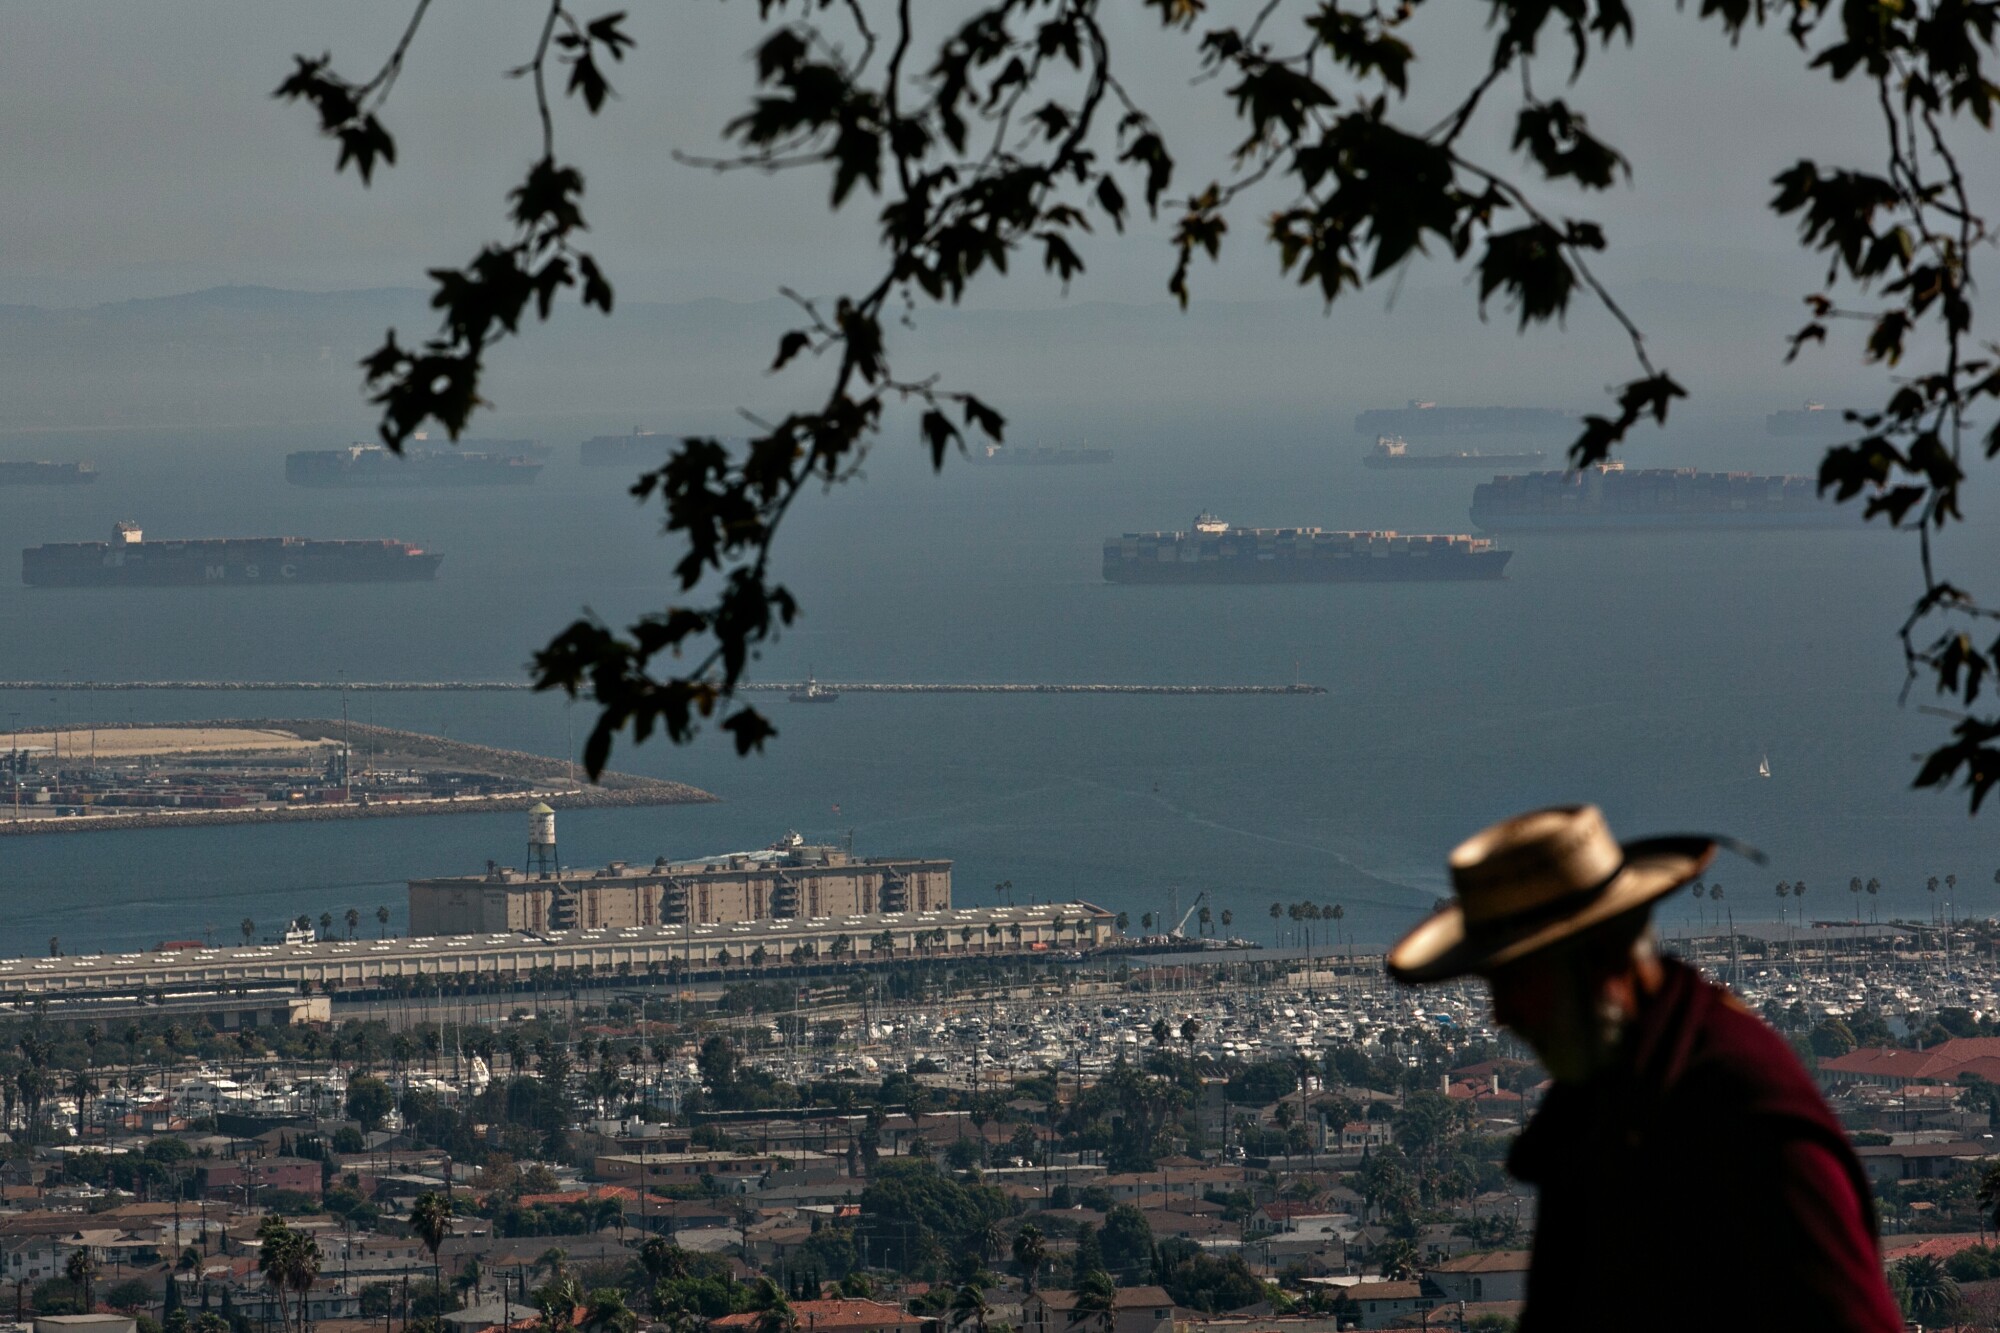 A man walks past a view of the Port of Los Angeles.